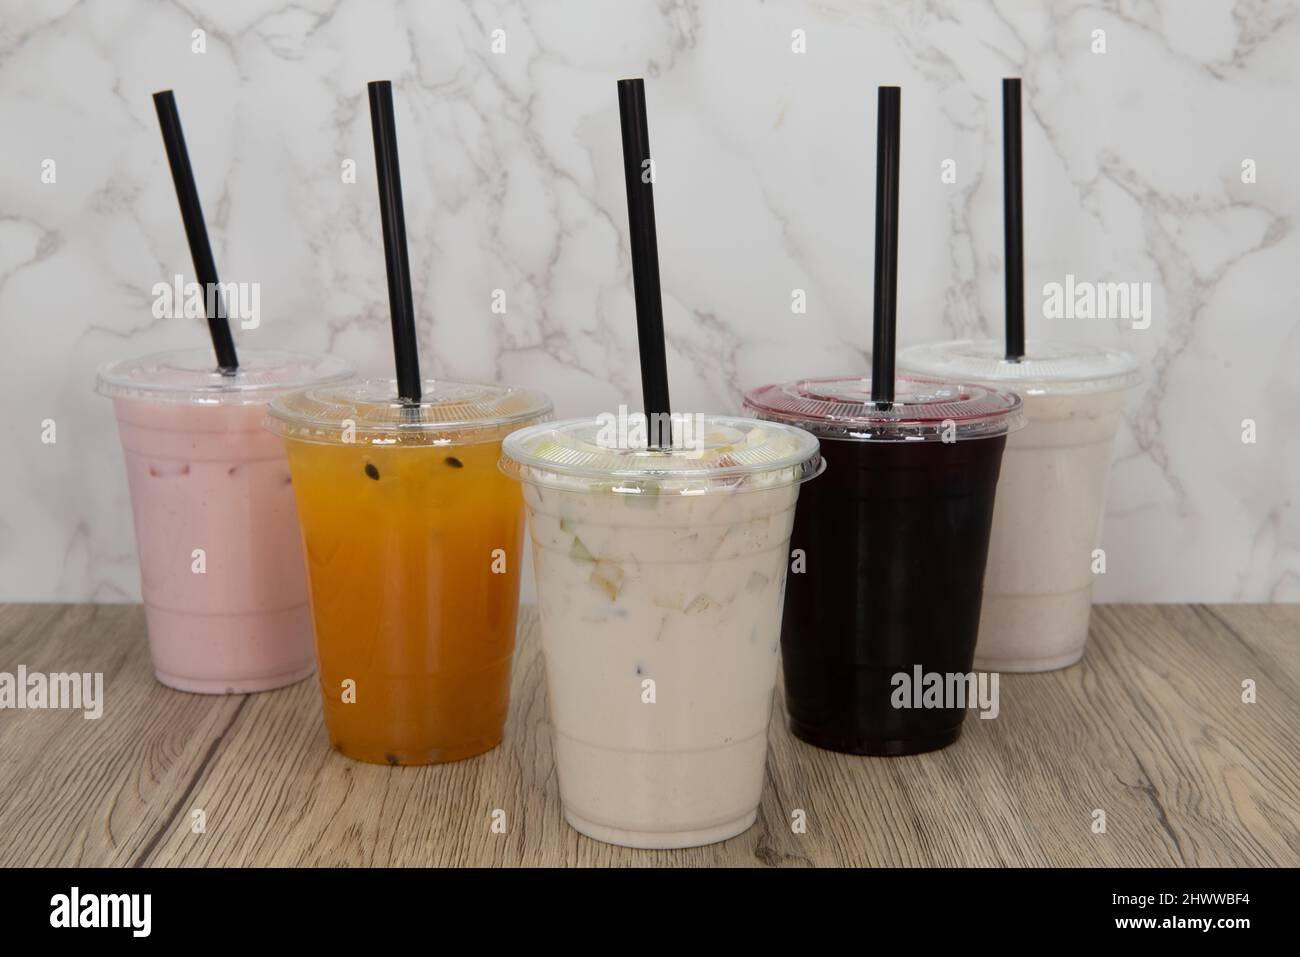 Variety of aqua frescas flavored sweet drinks in a take out order cup to dink on the go. Stock Photo